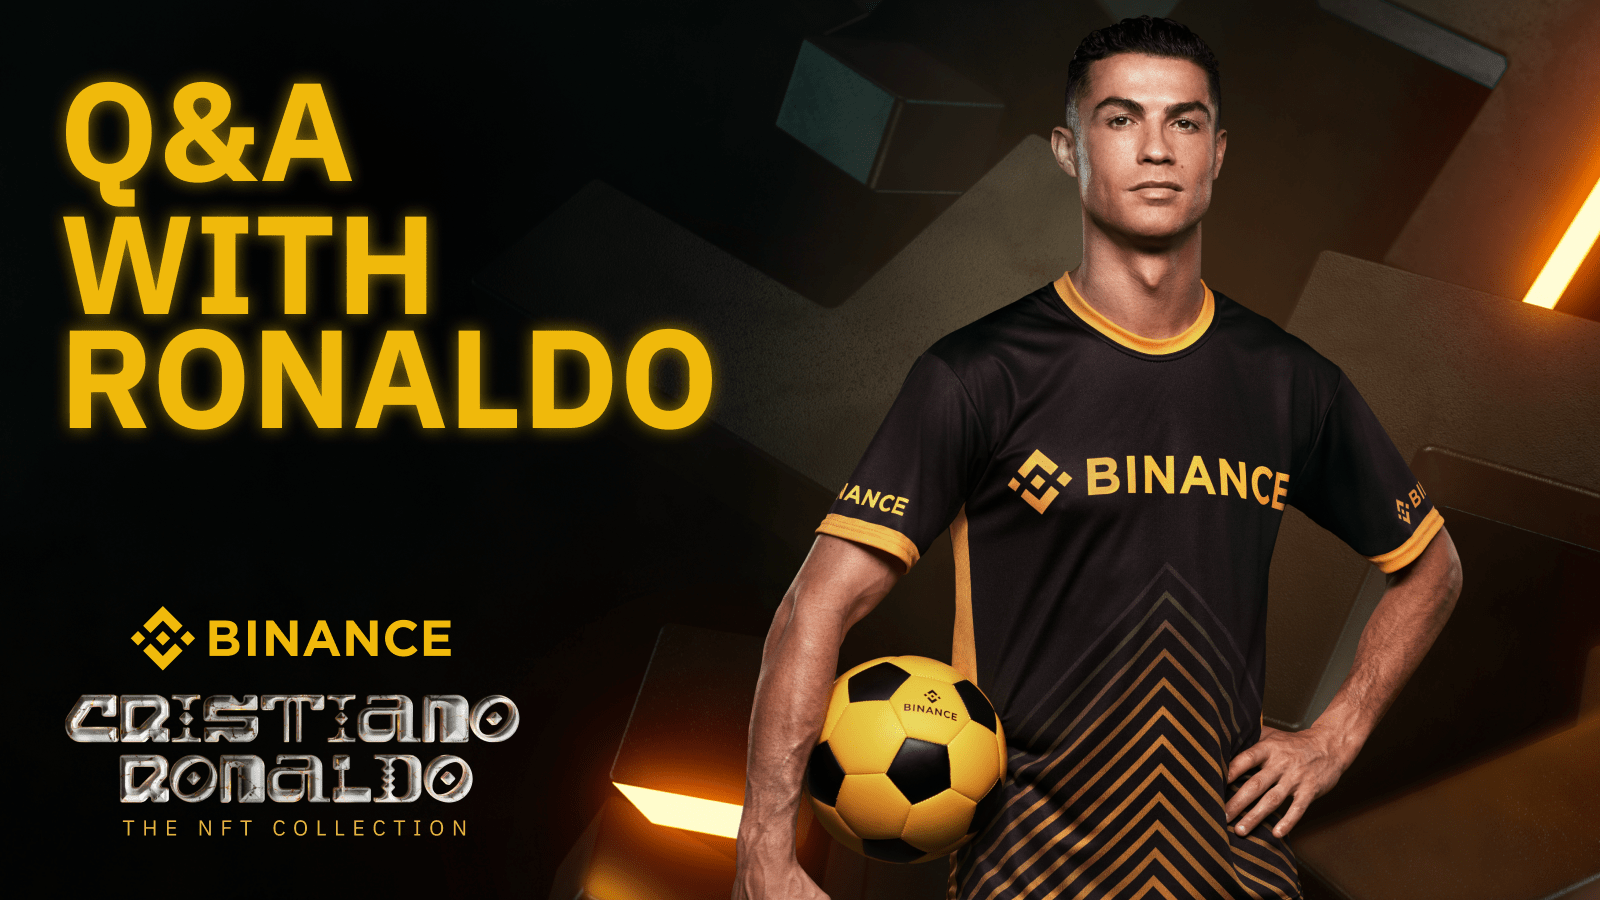 Cristiano Ronaldo to launch NFT collection in partnership with Binance